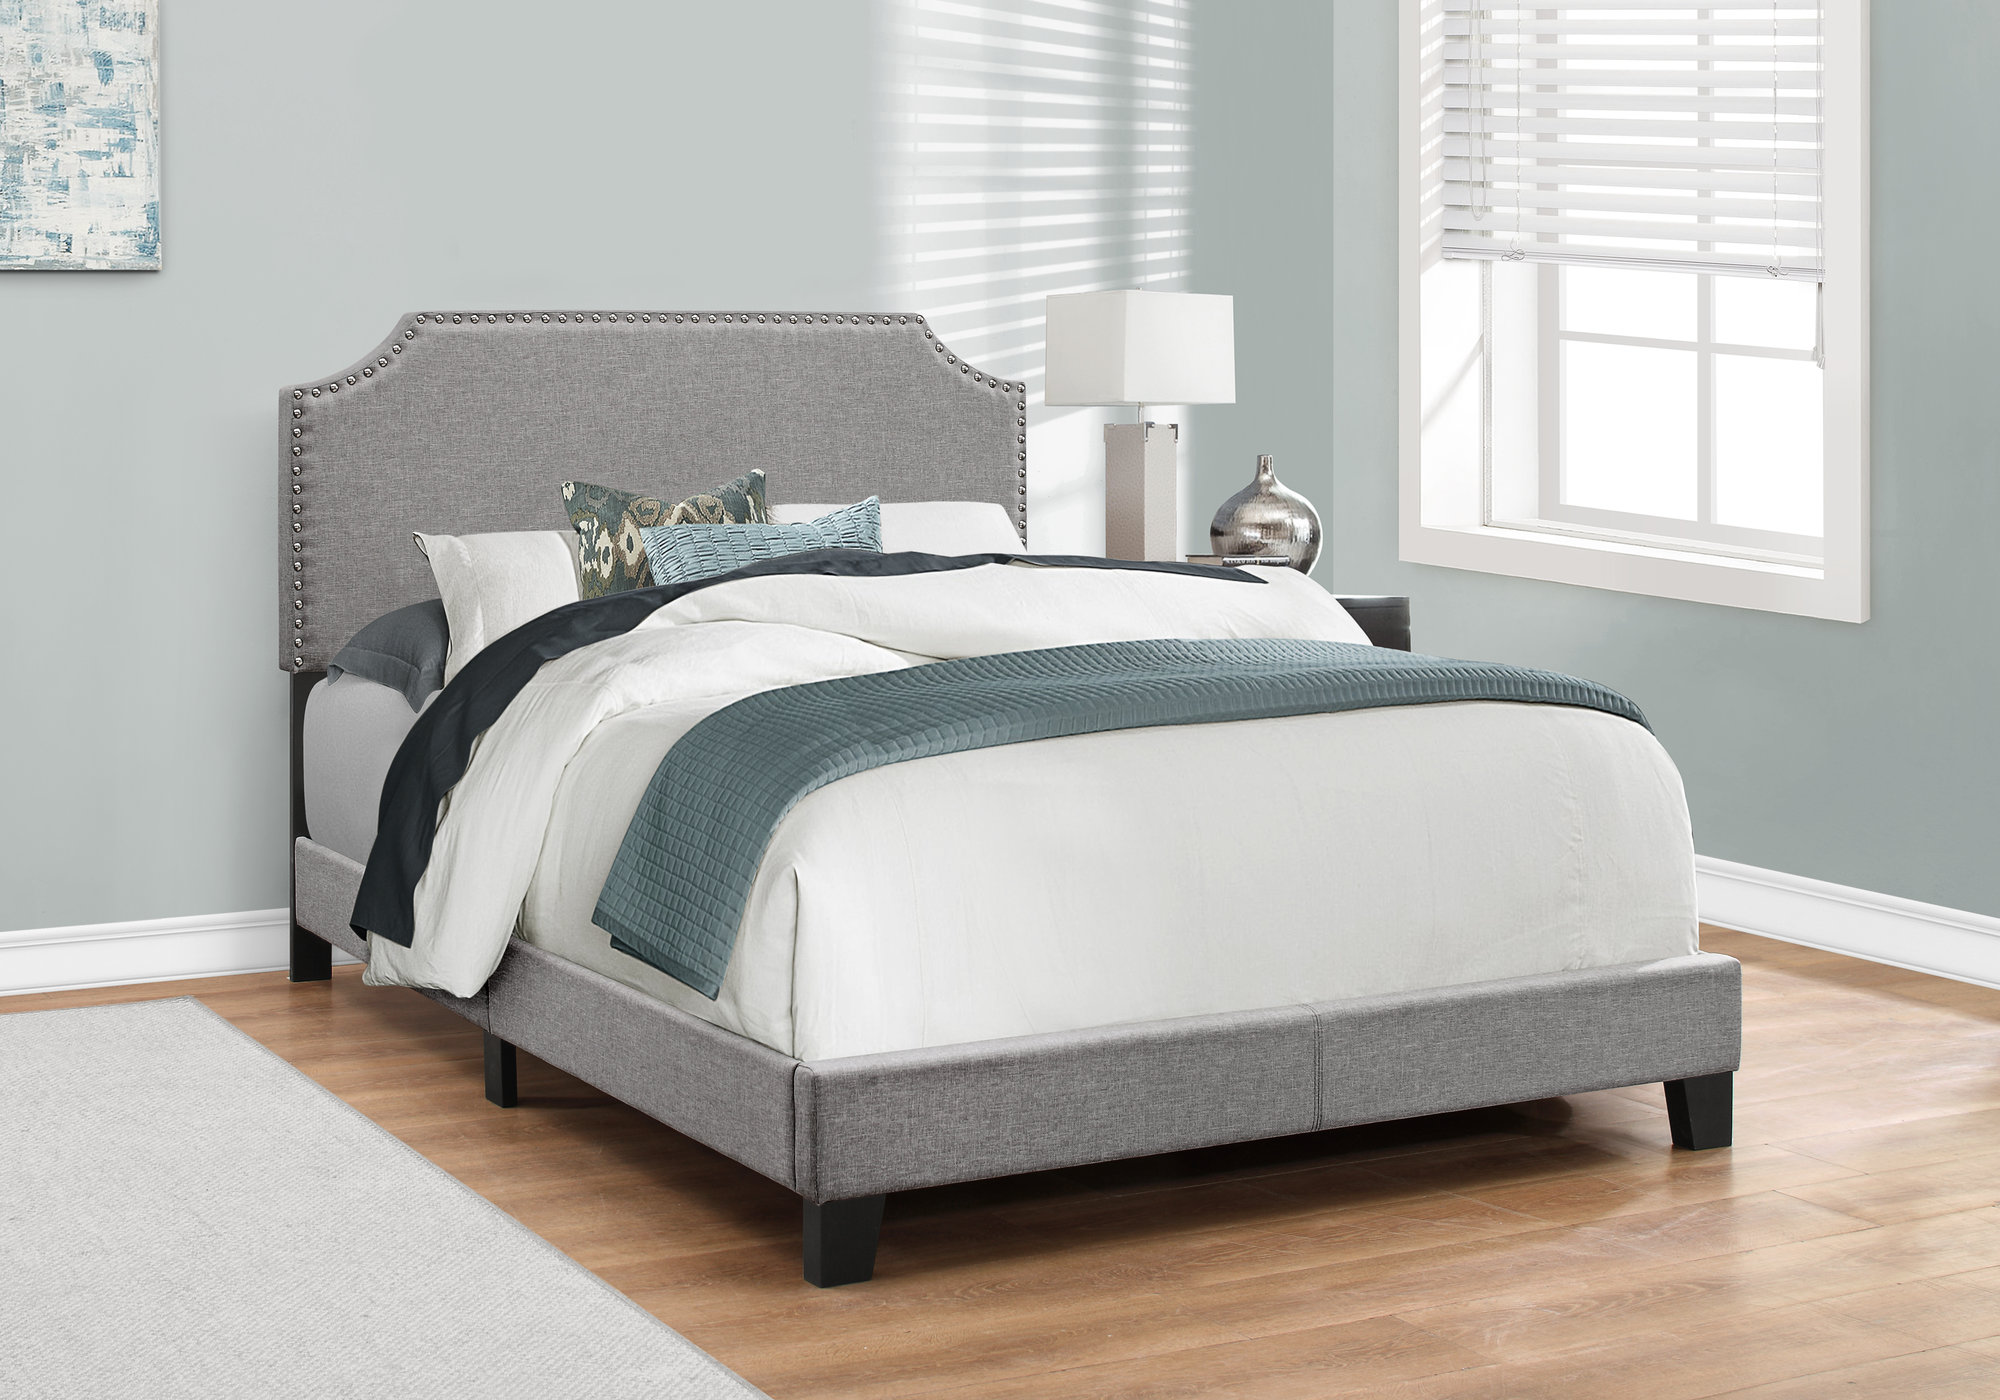 Full Size Grey Linen with Chrome Trim and Solid Wood Black Feet Bed